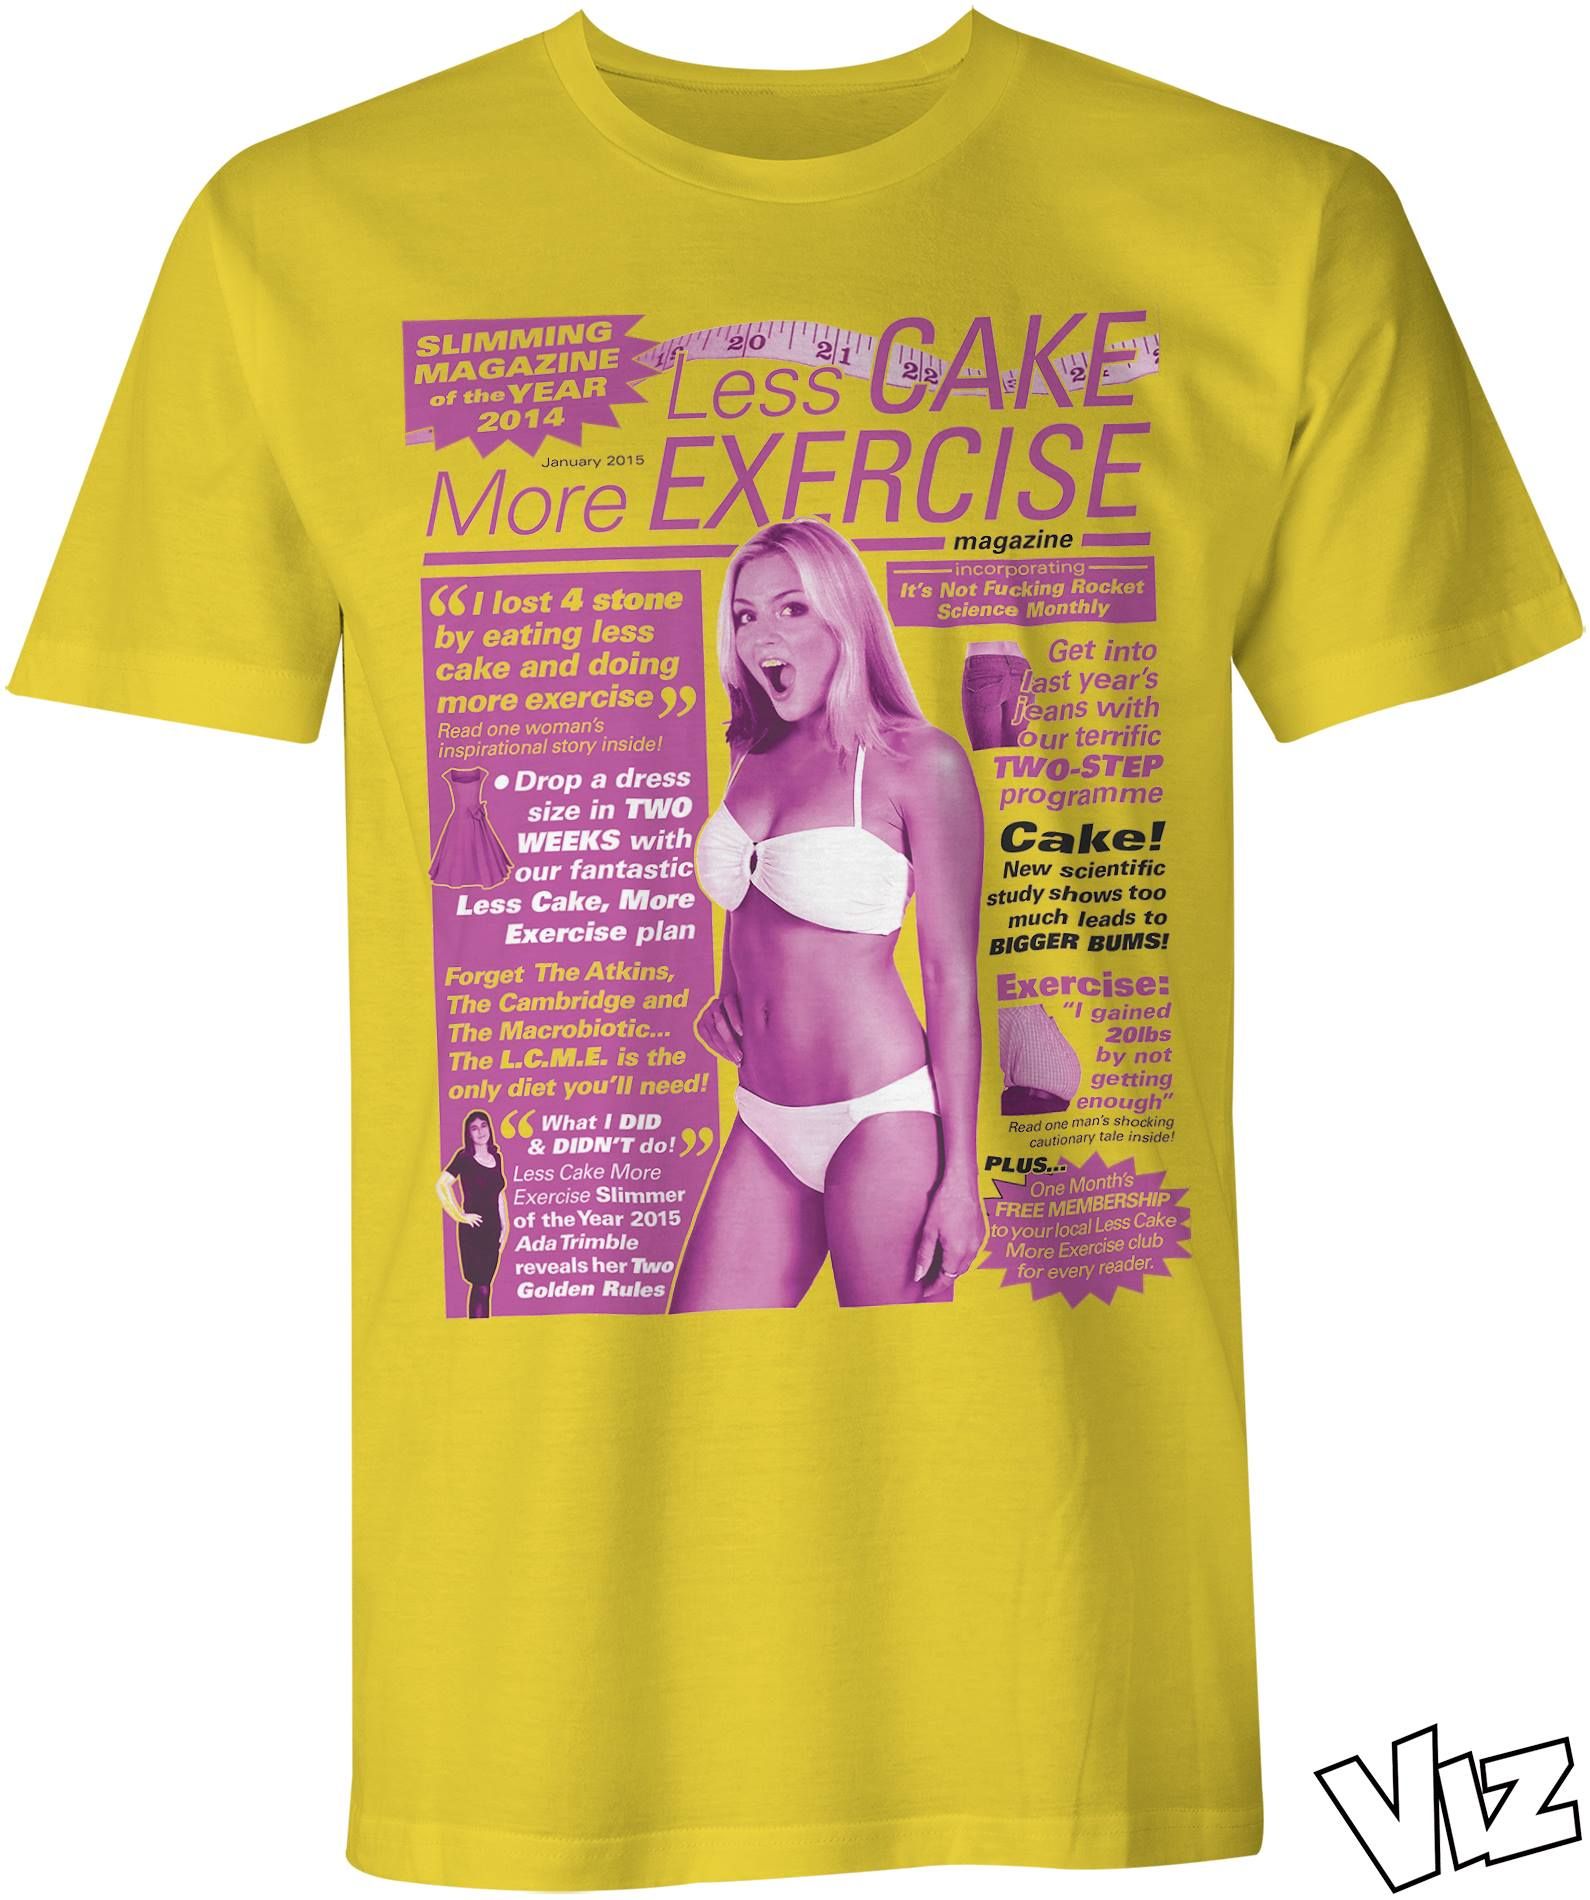 Less cake more exercise – Slimming magazine of the year 2014